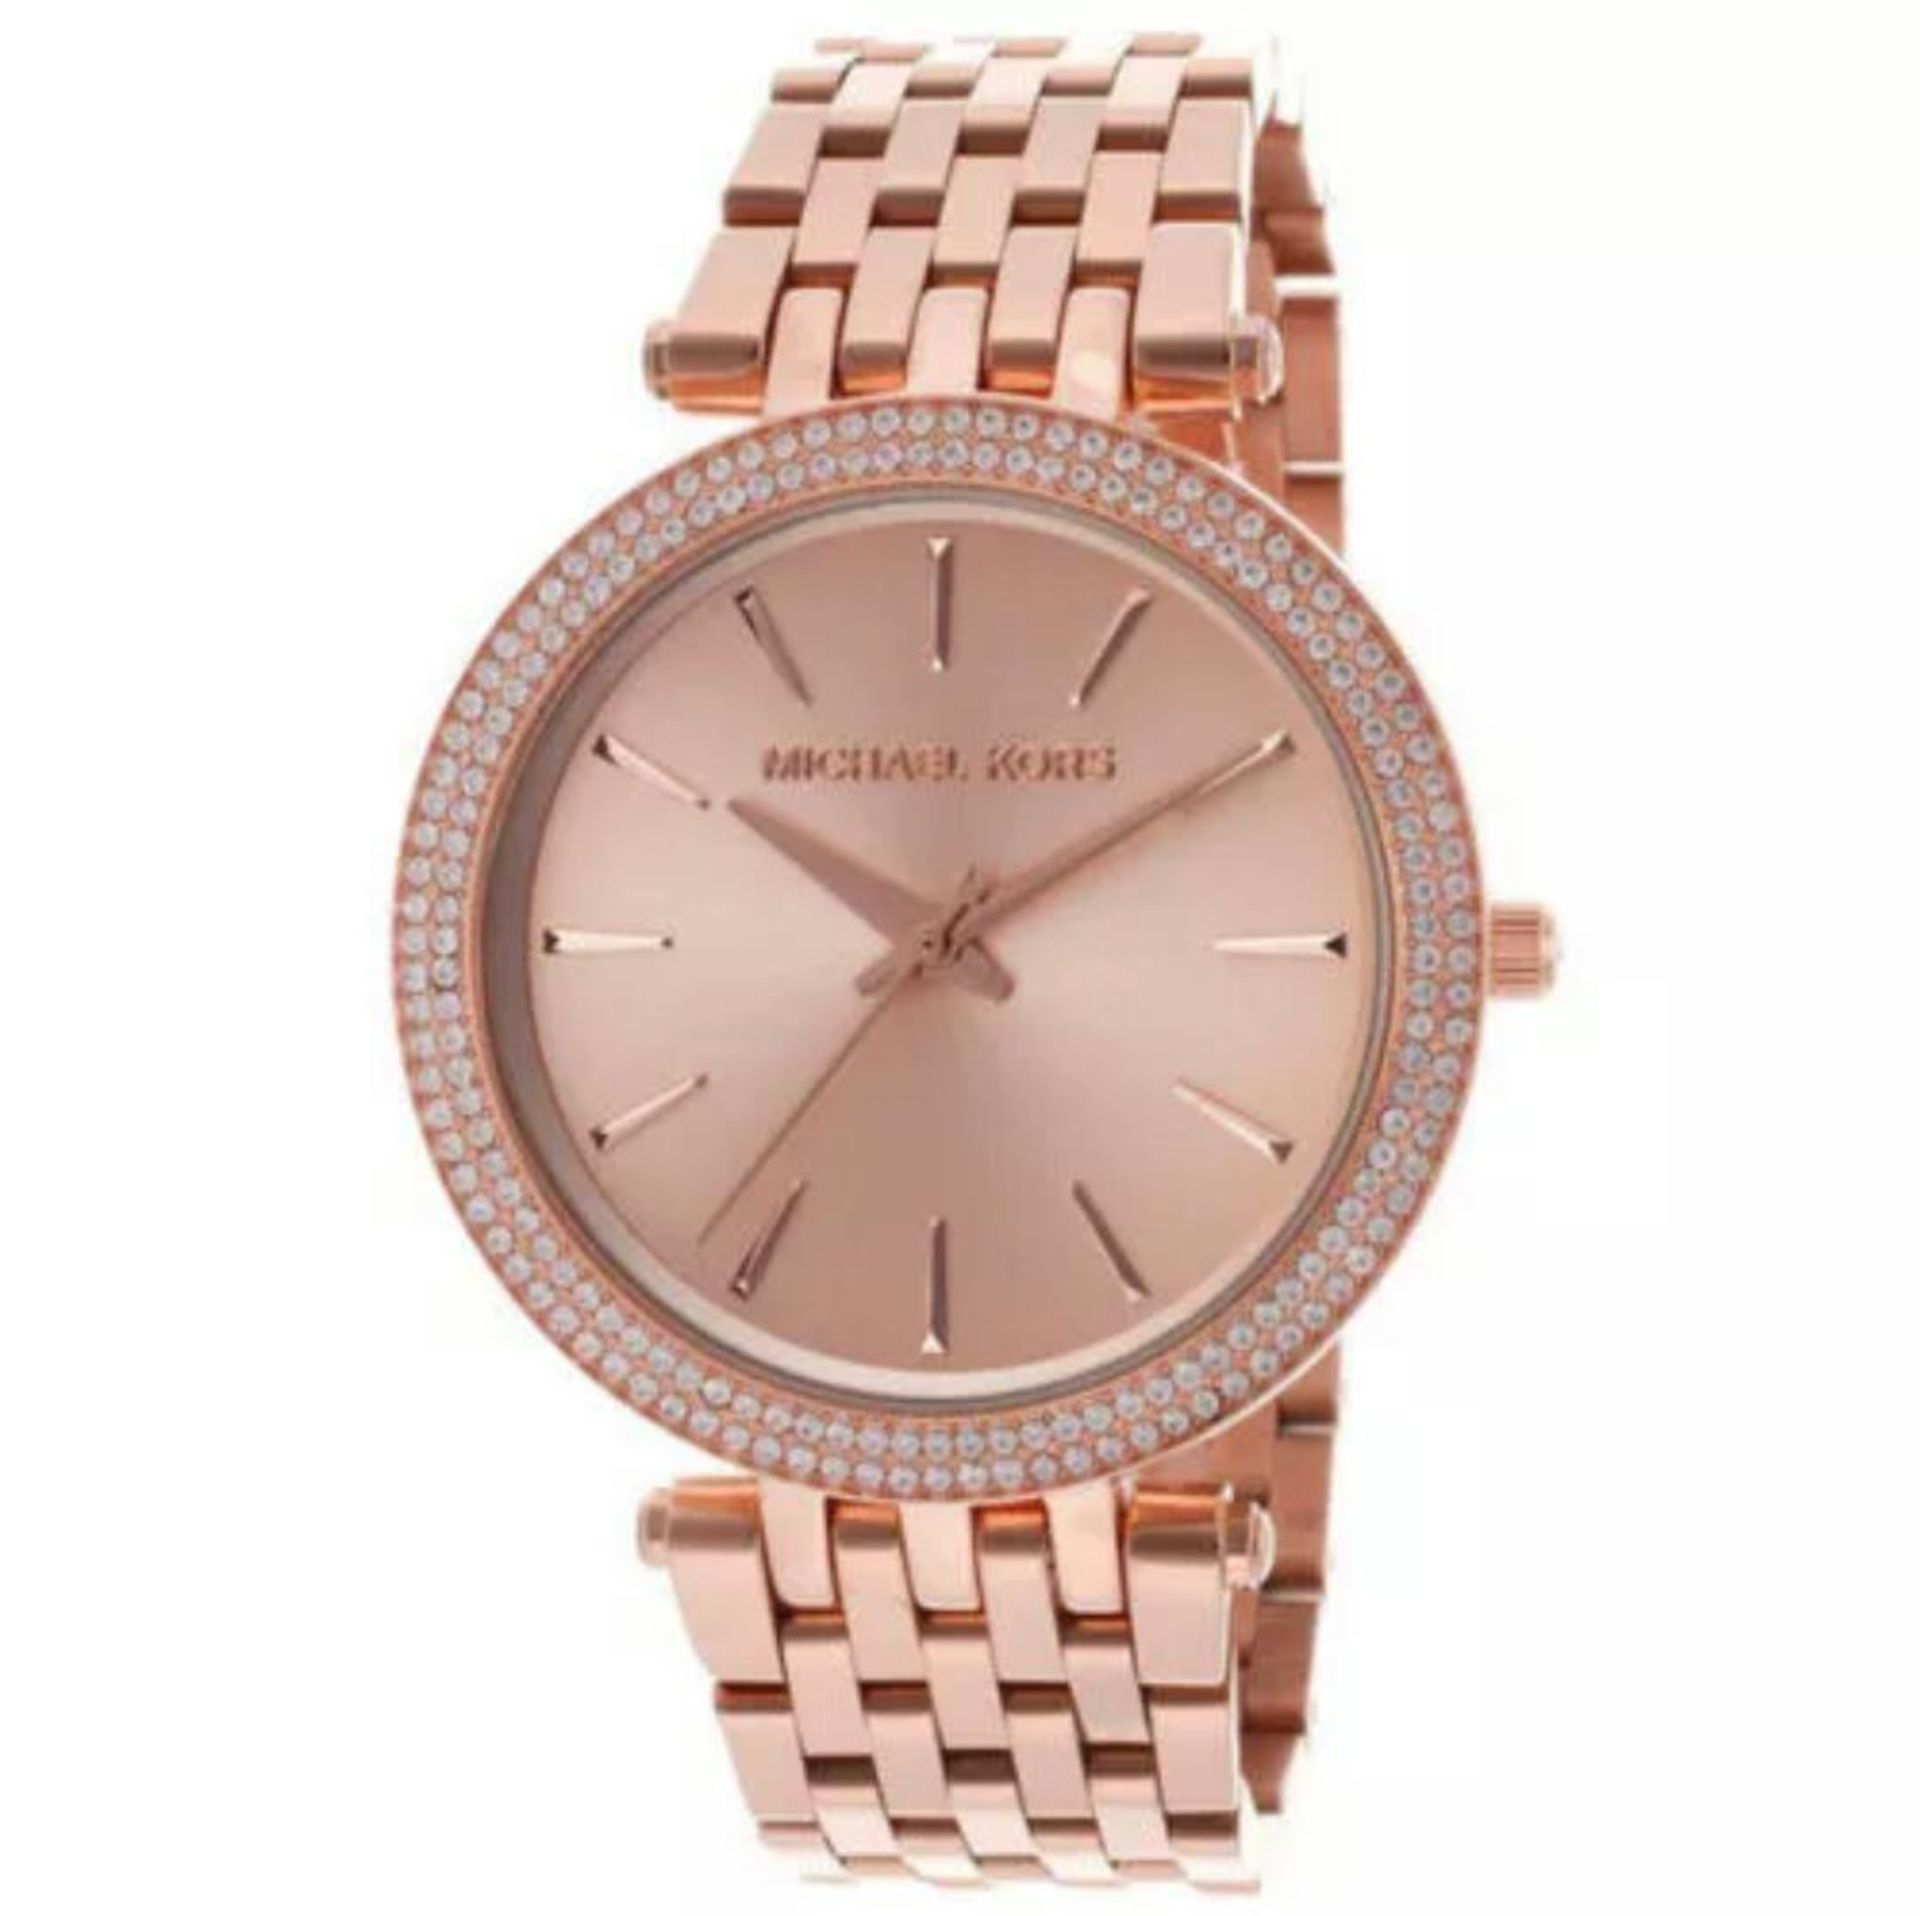 BRAND NEW MICHAEL KORS MK3192, LADIES DESIGNER WATCH, COMPLETE WITH ORIGINAL BOX AND MANUAL - RRP £